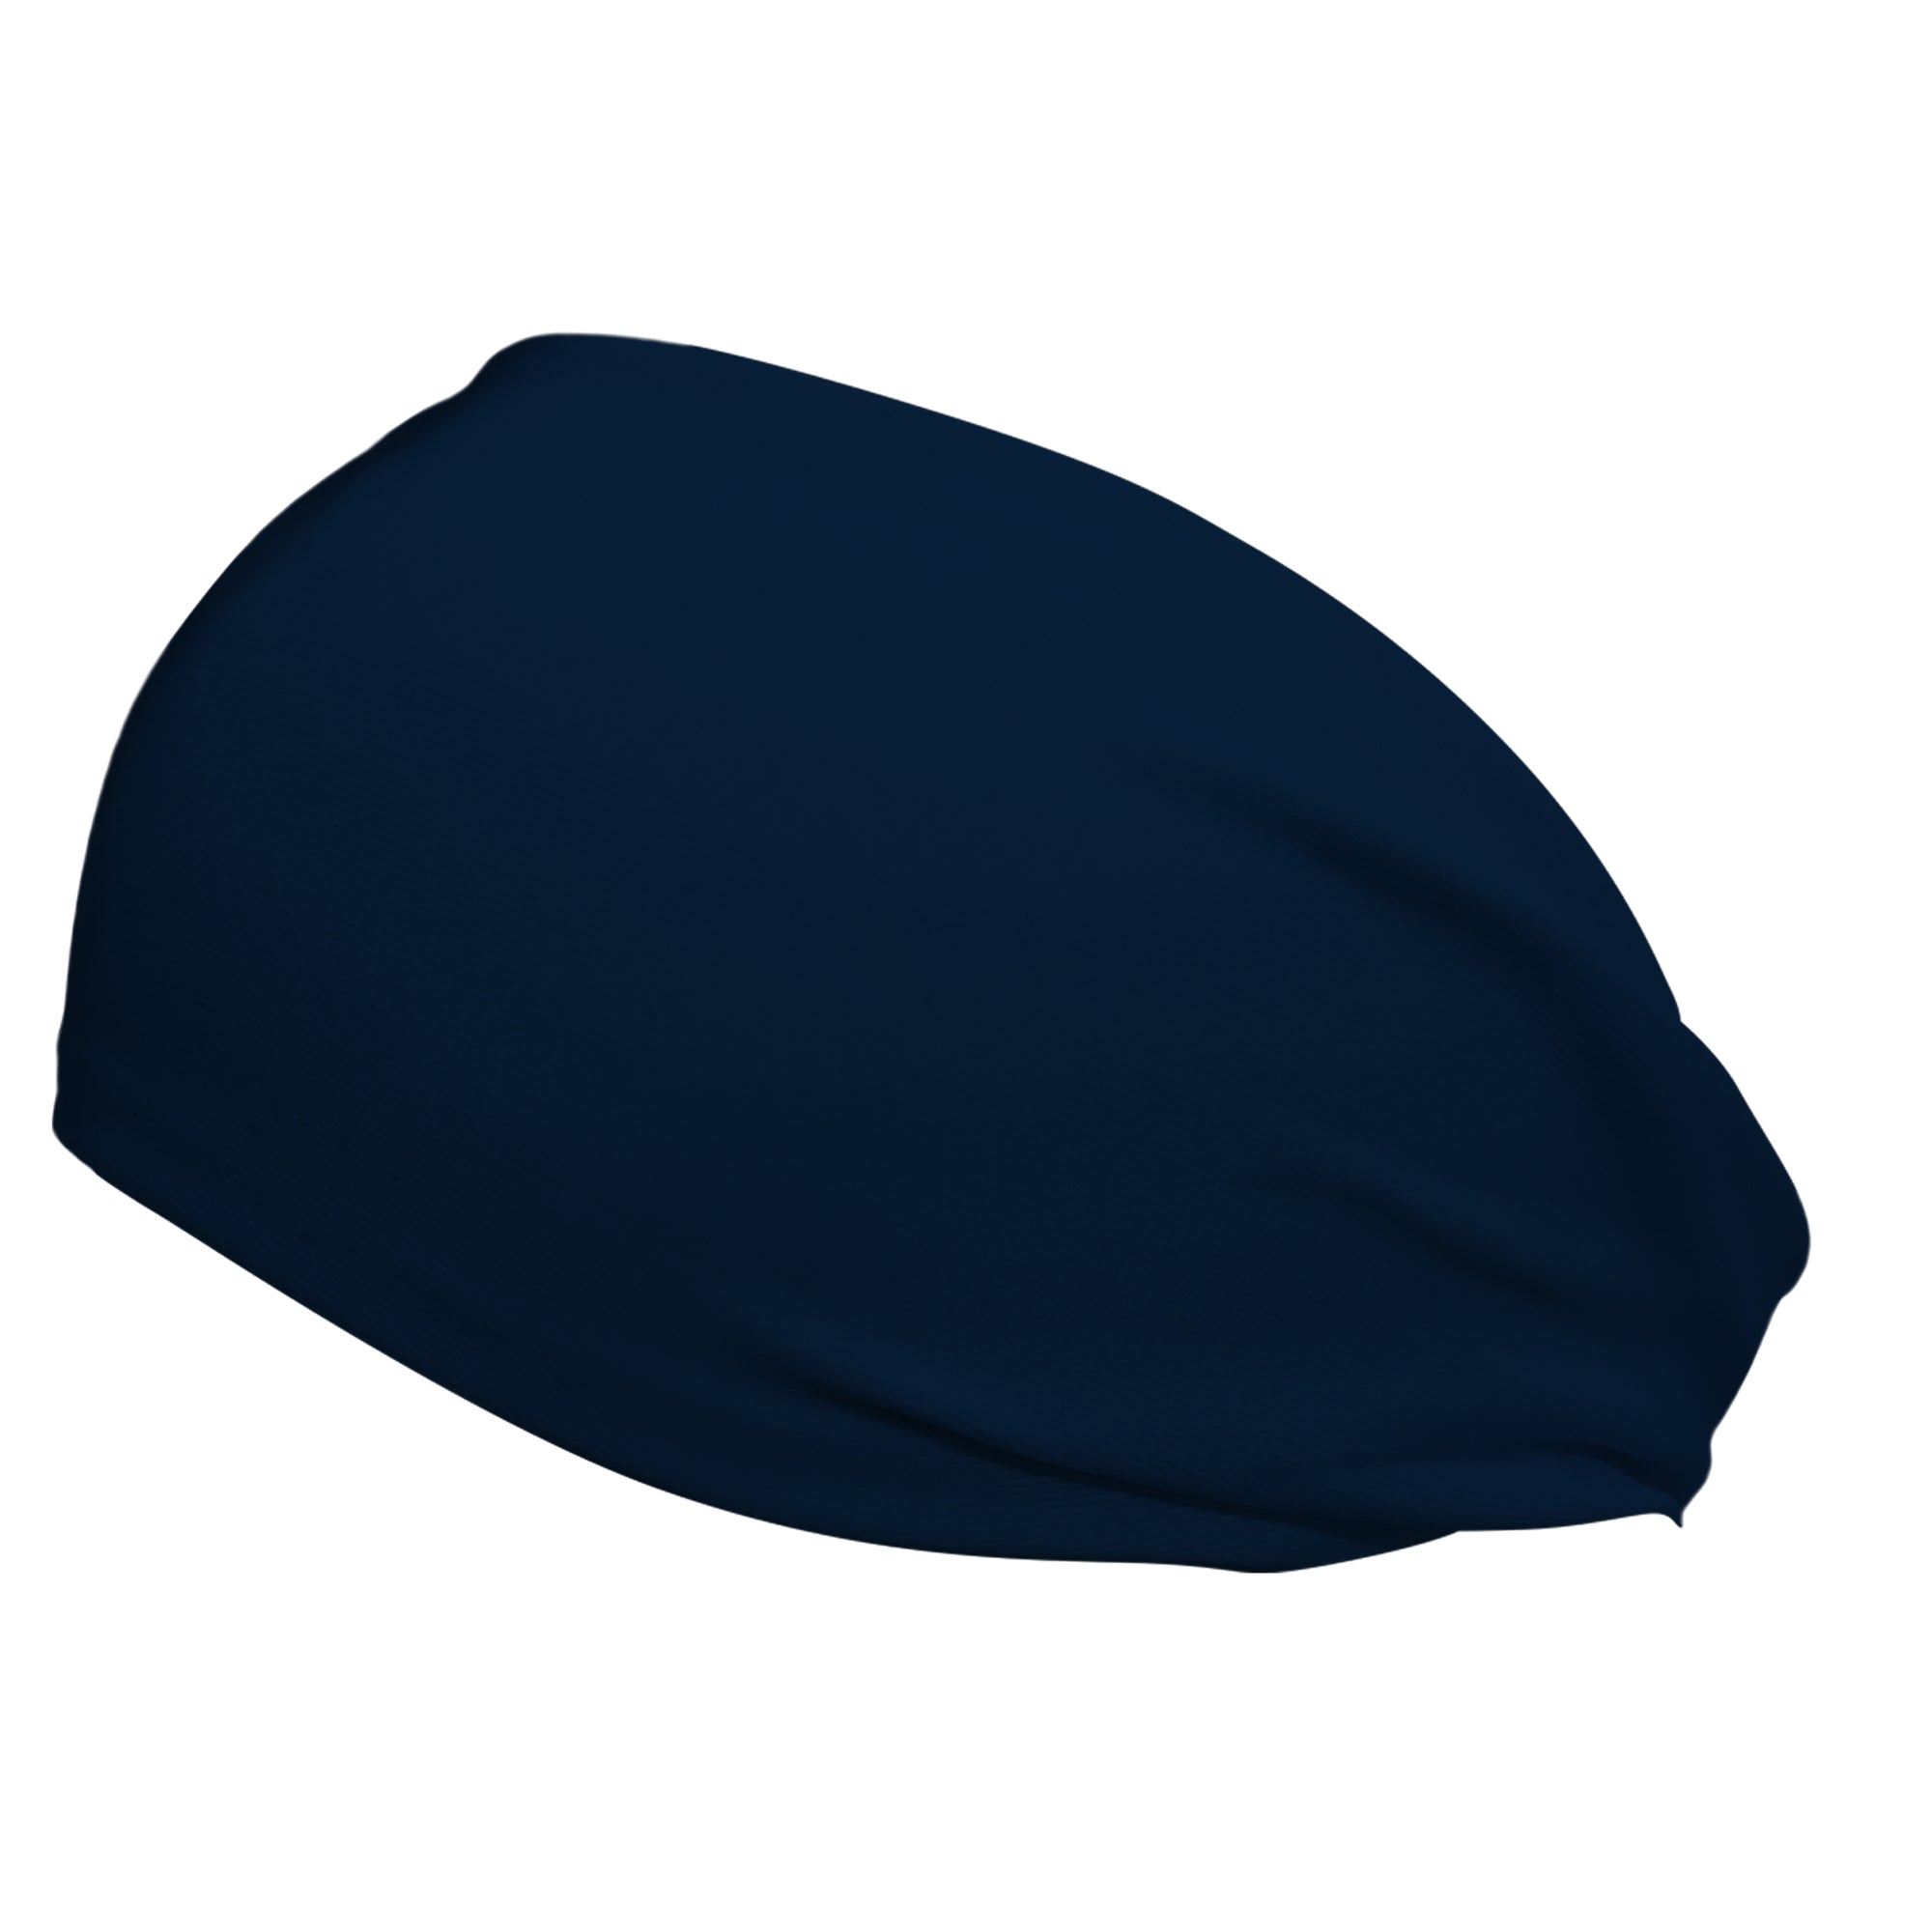 Navy blue cooling headband for men and women. Made in USA cooling headband by Bani Bands.